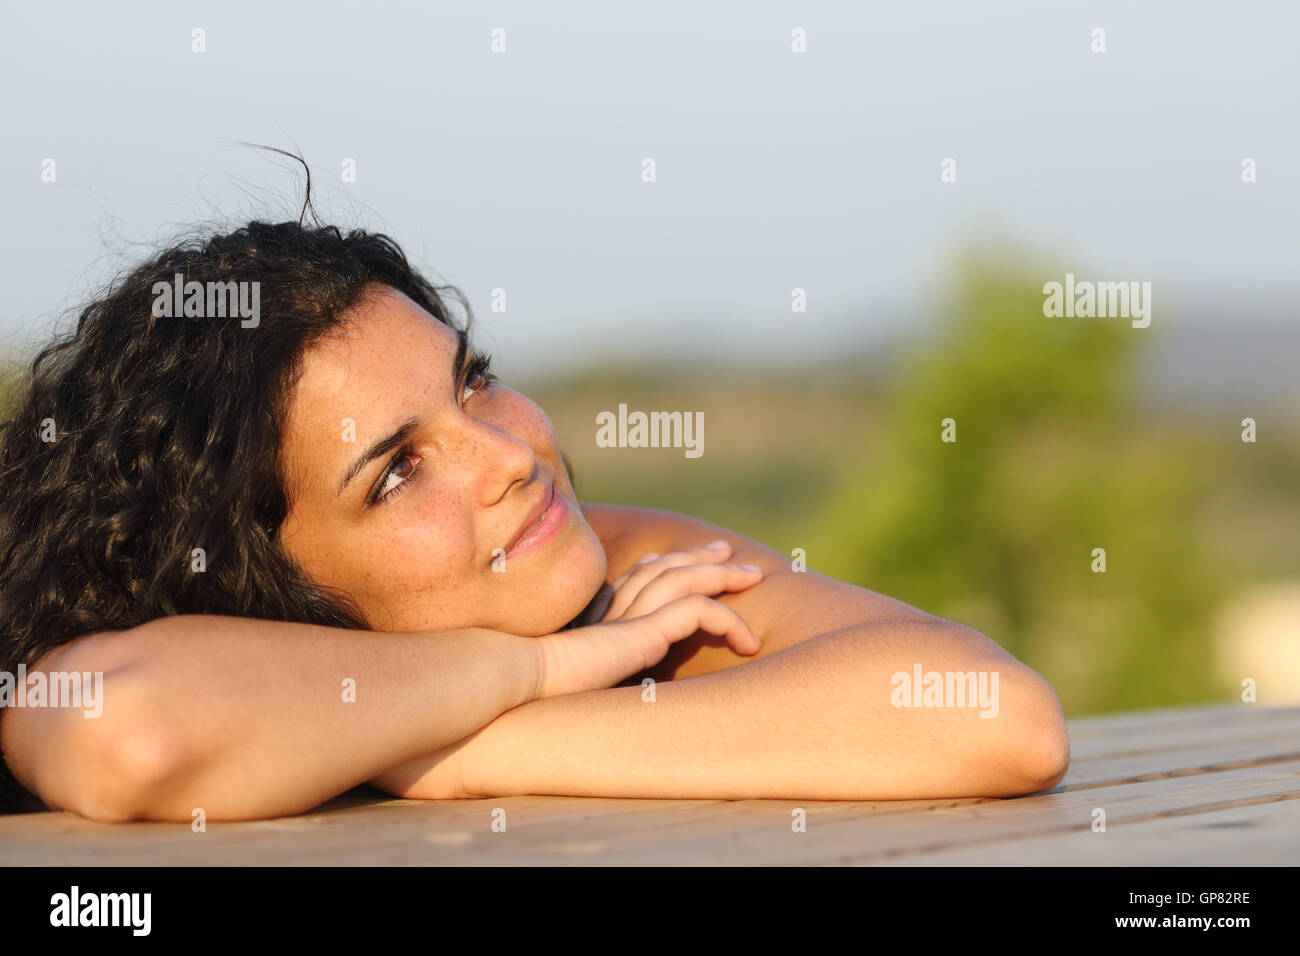 Candid girl dreaming and thinking leaning on a table outdoors Stock Photo